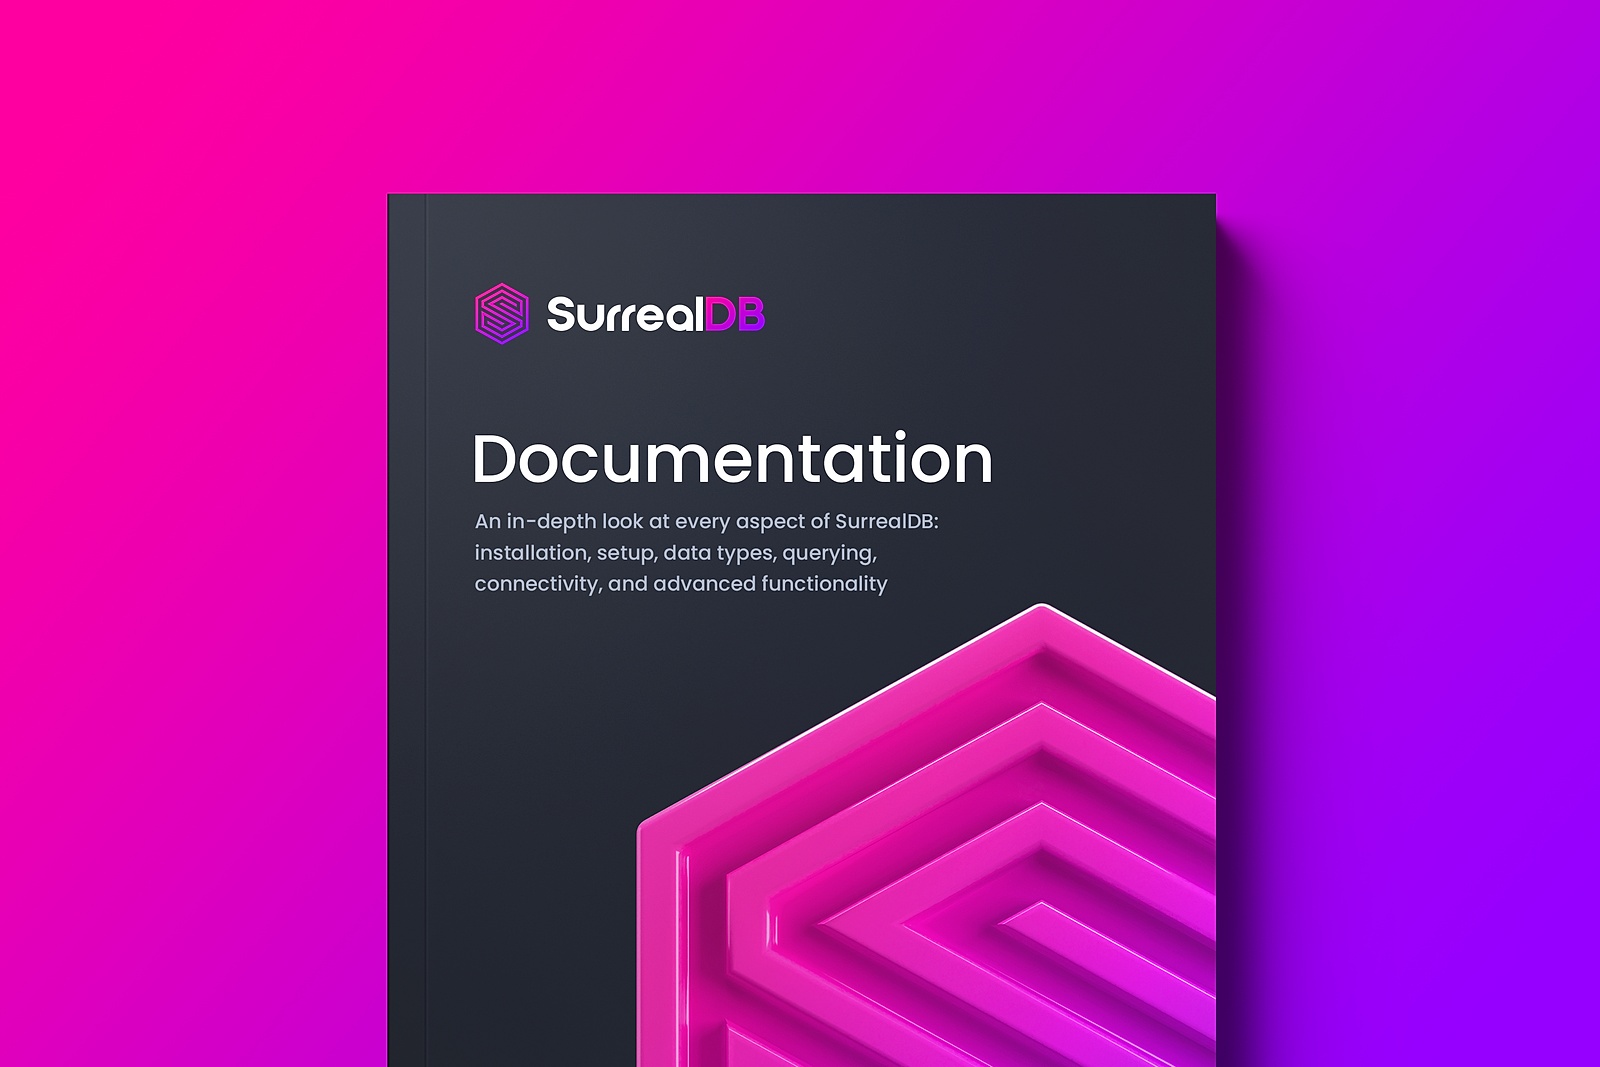 Documentation is live